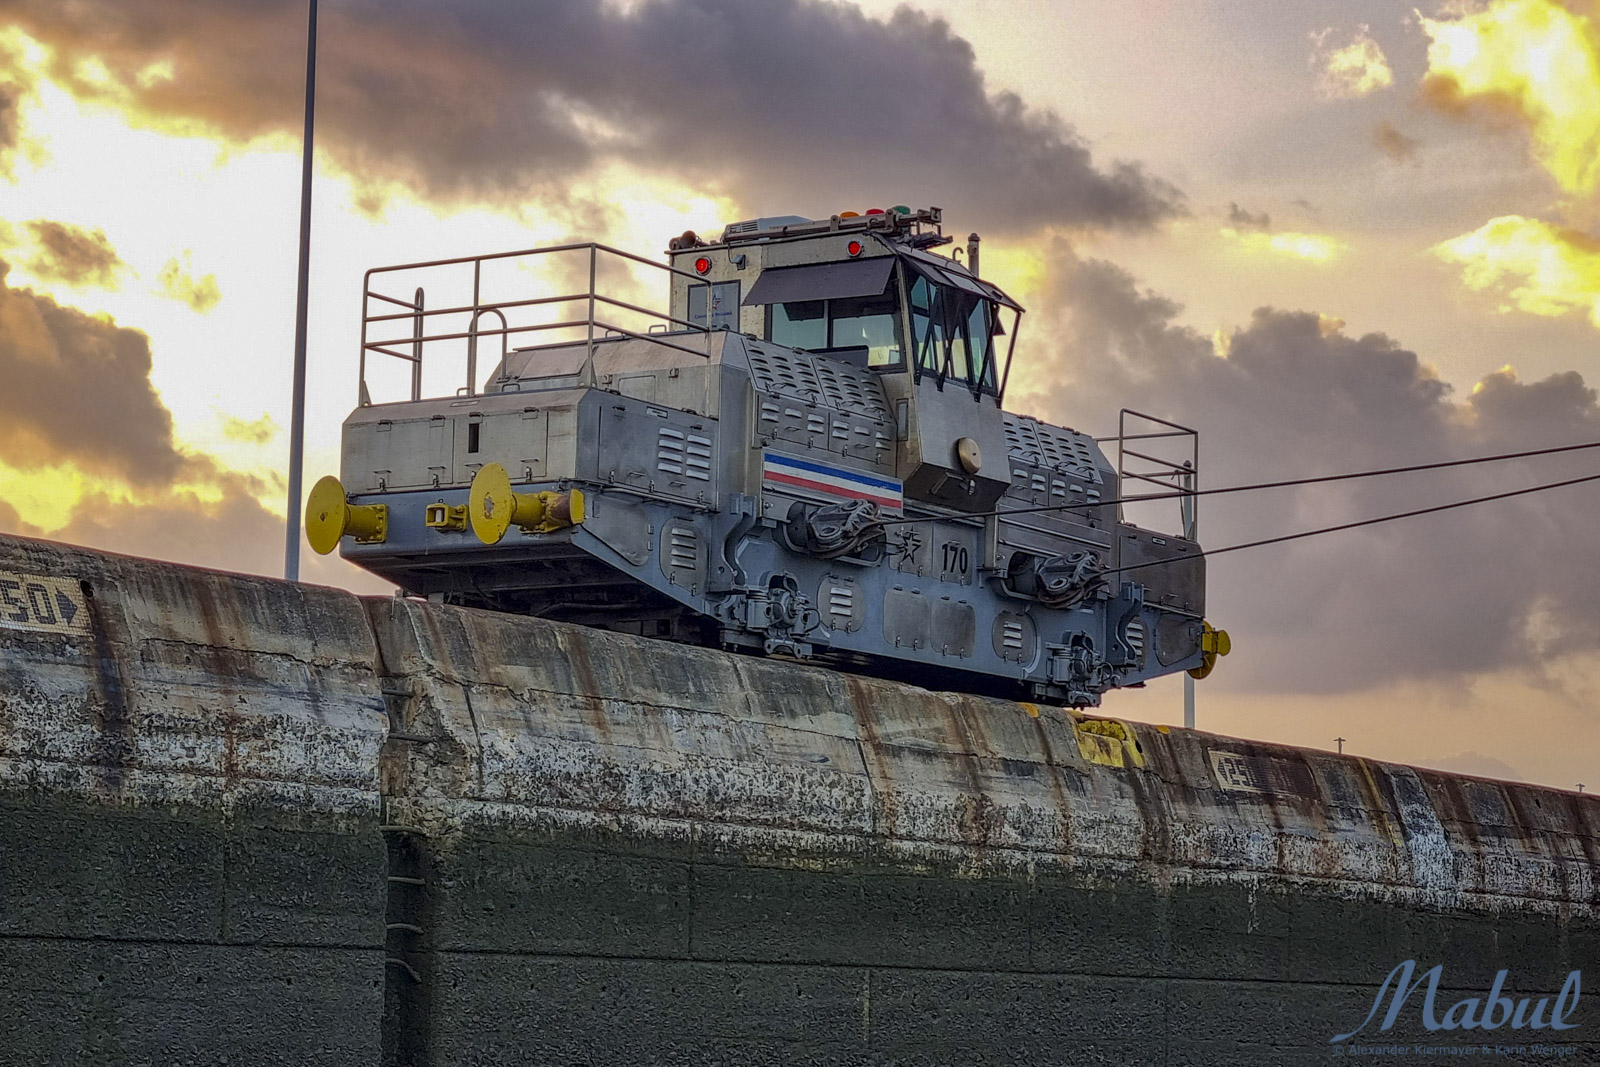 Gallery – Panama Canal